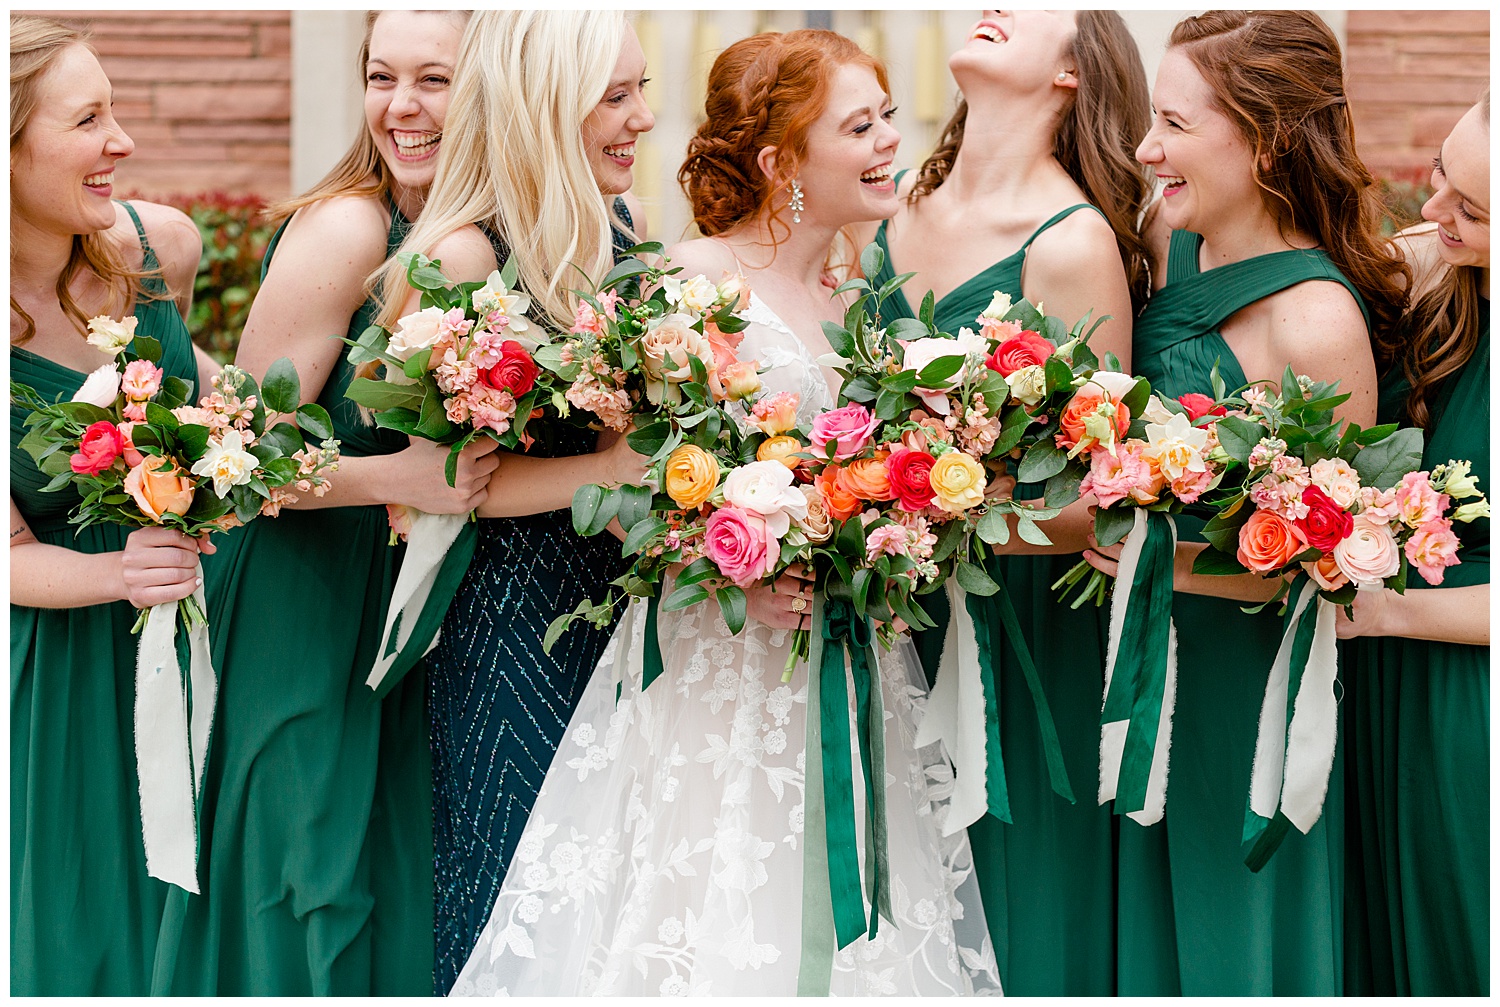 Bride and bridesmaids in emerald green dresses on a rainy wedding day.